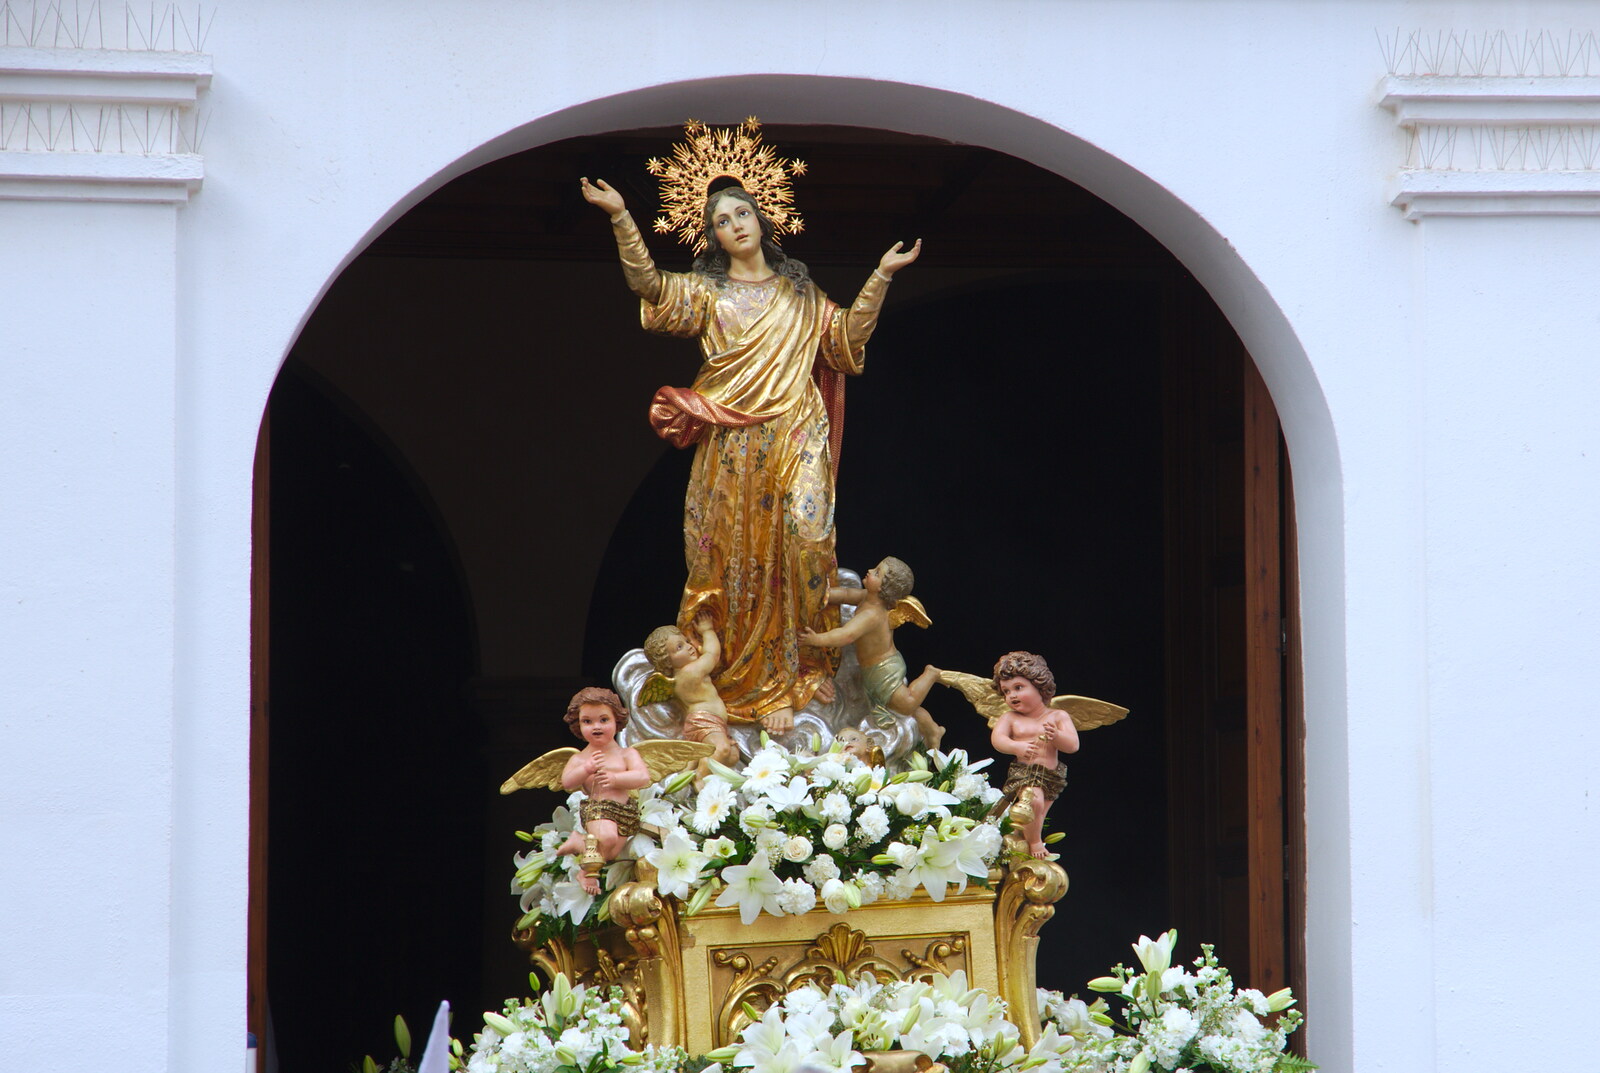 The final statue appears from An Easter Parade, Nerja, Andalusia, Spain - 21st April 2019